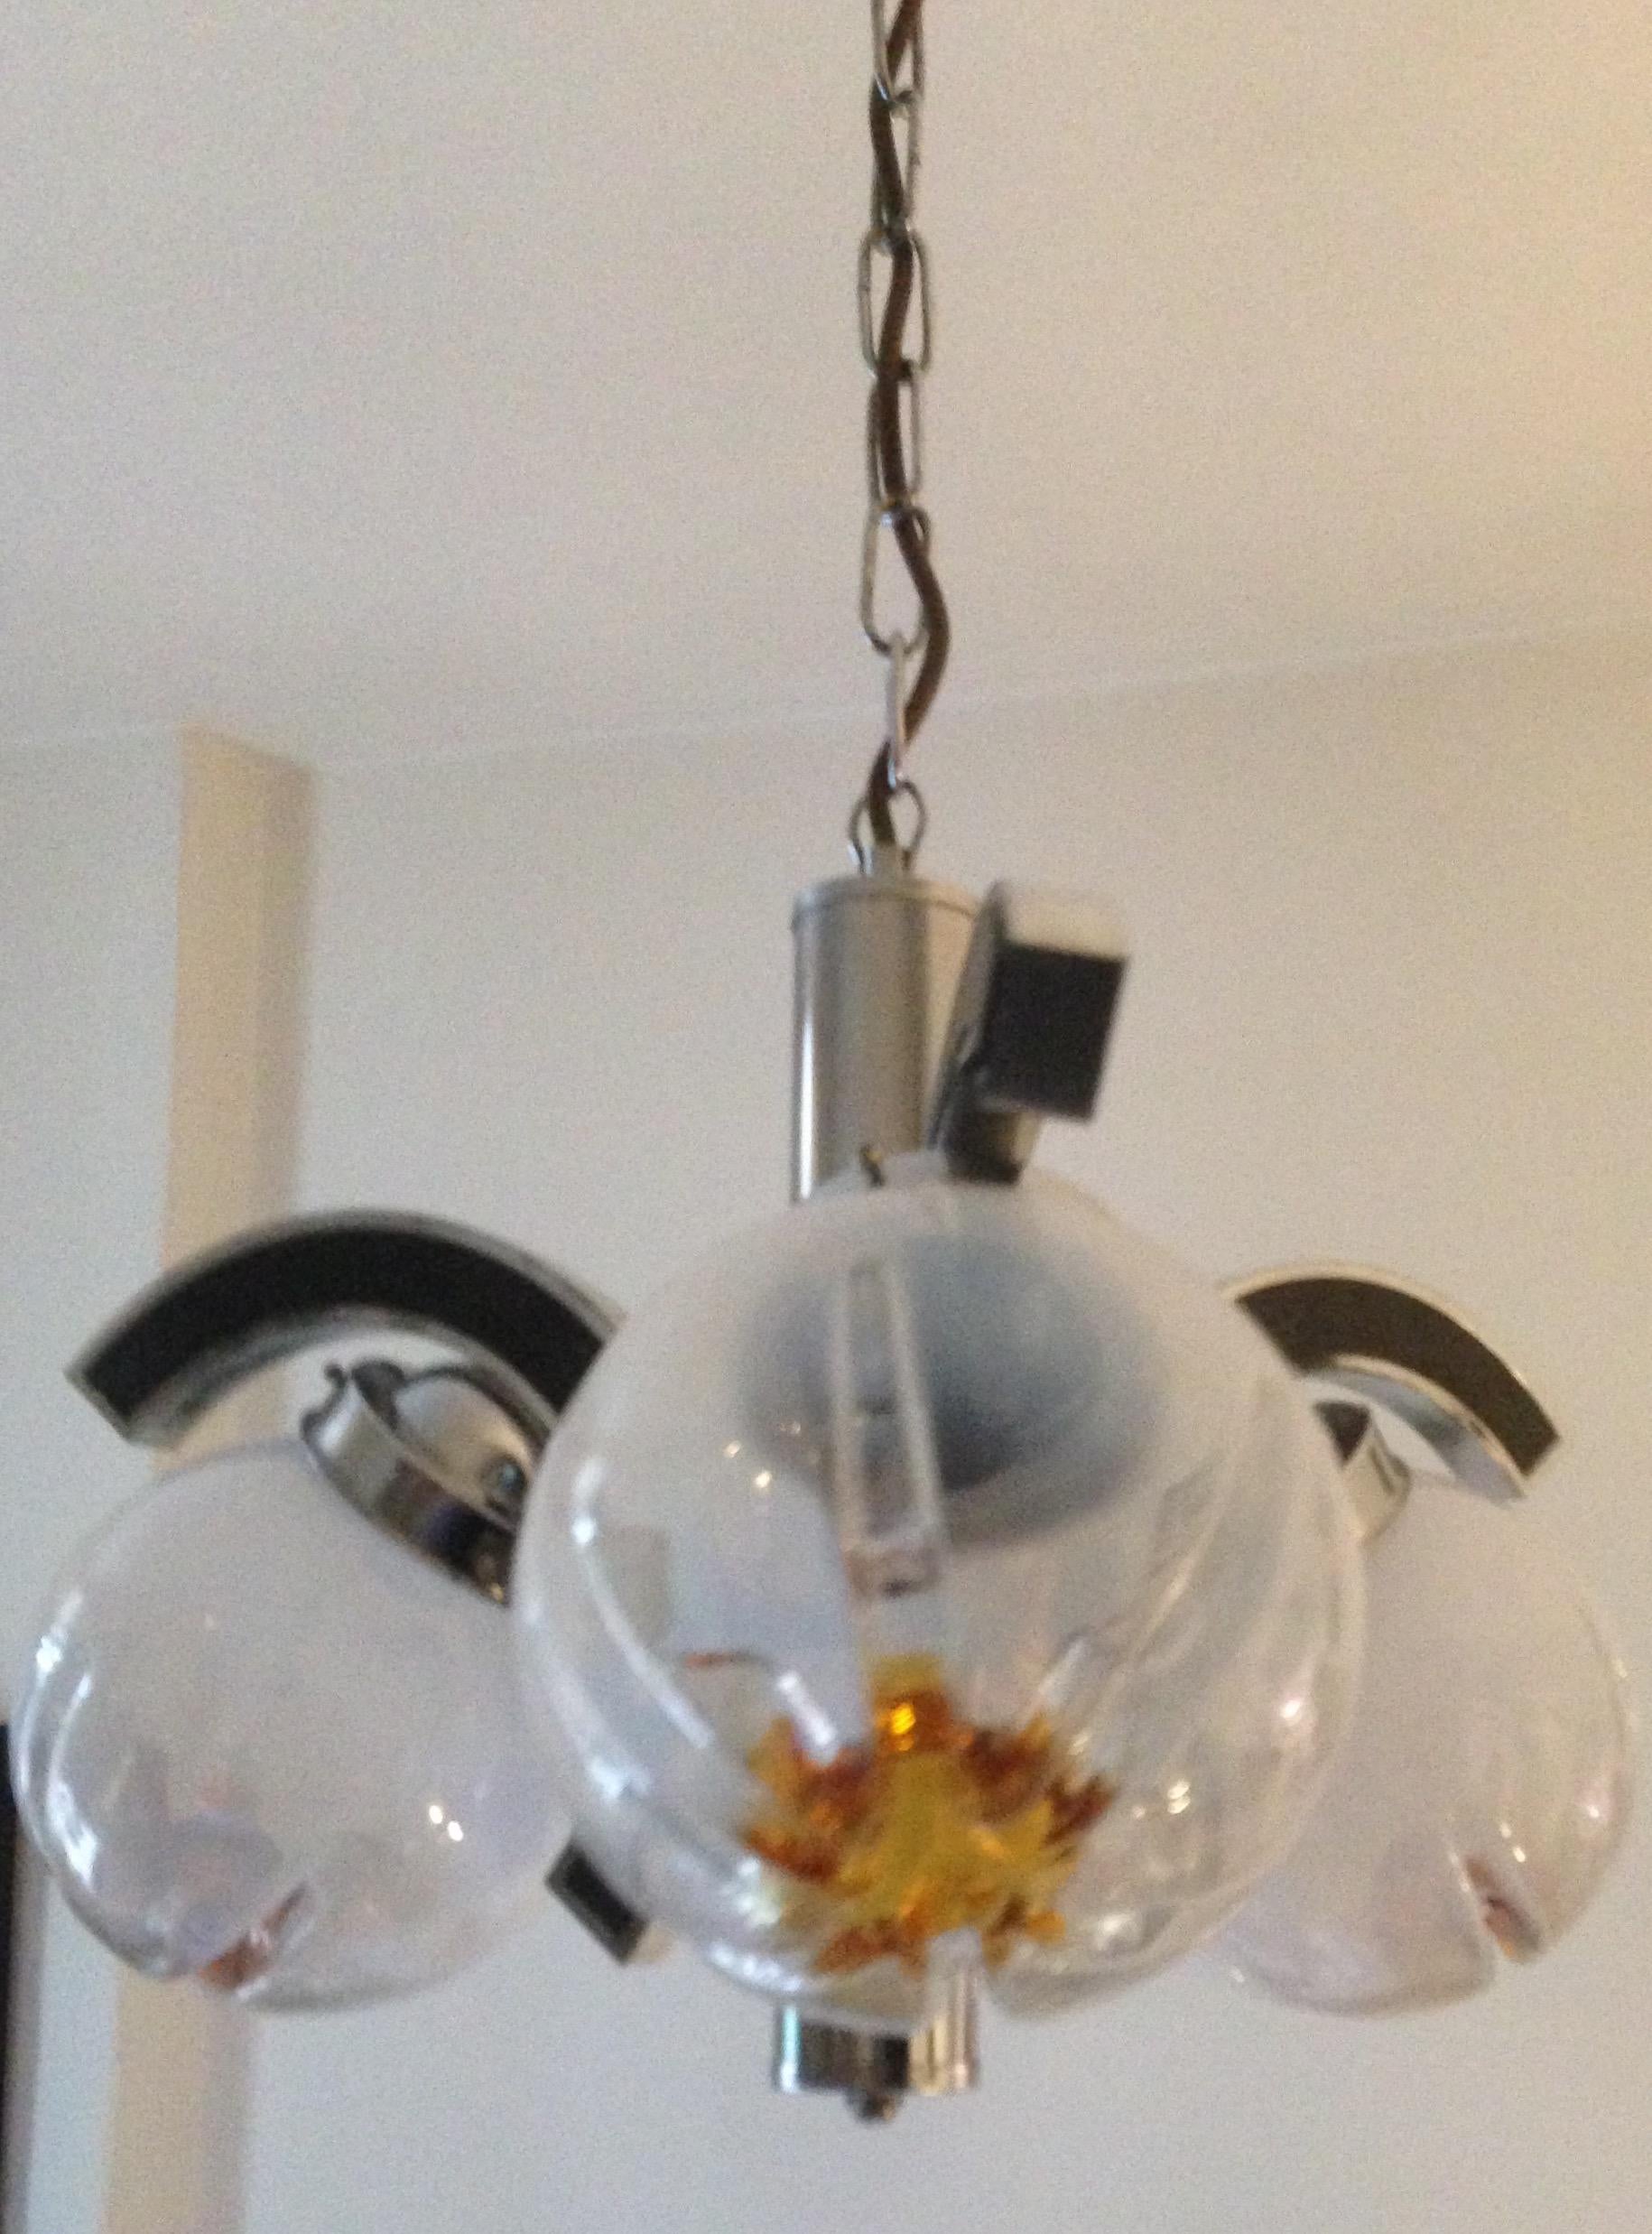 Mid-Century Modern Murano Glass Mazzega chrome and glass chandelier.
Fantastic Mazzega Murano glass and chrome ceiling pendant light. This beautiful light fixture will grace any area of your home with subtle warm light. The glass is handblown and